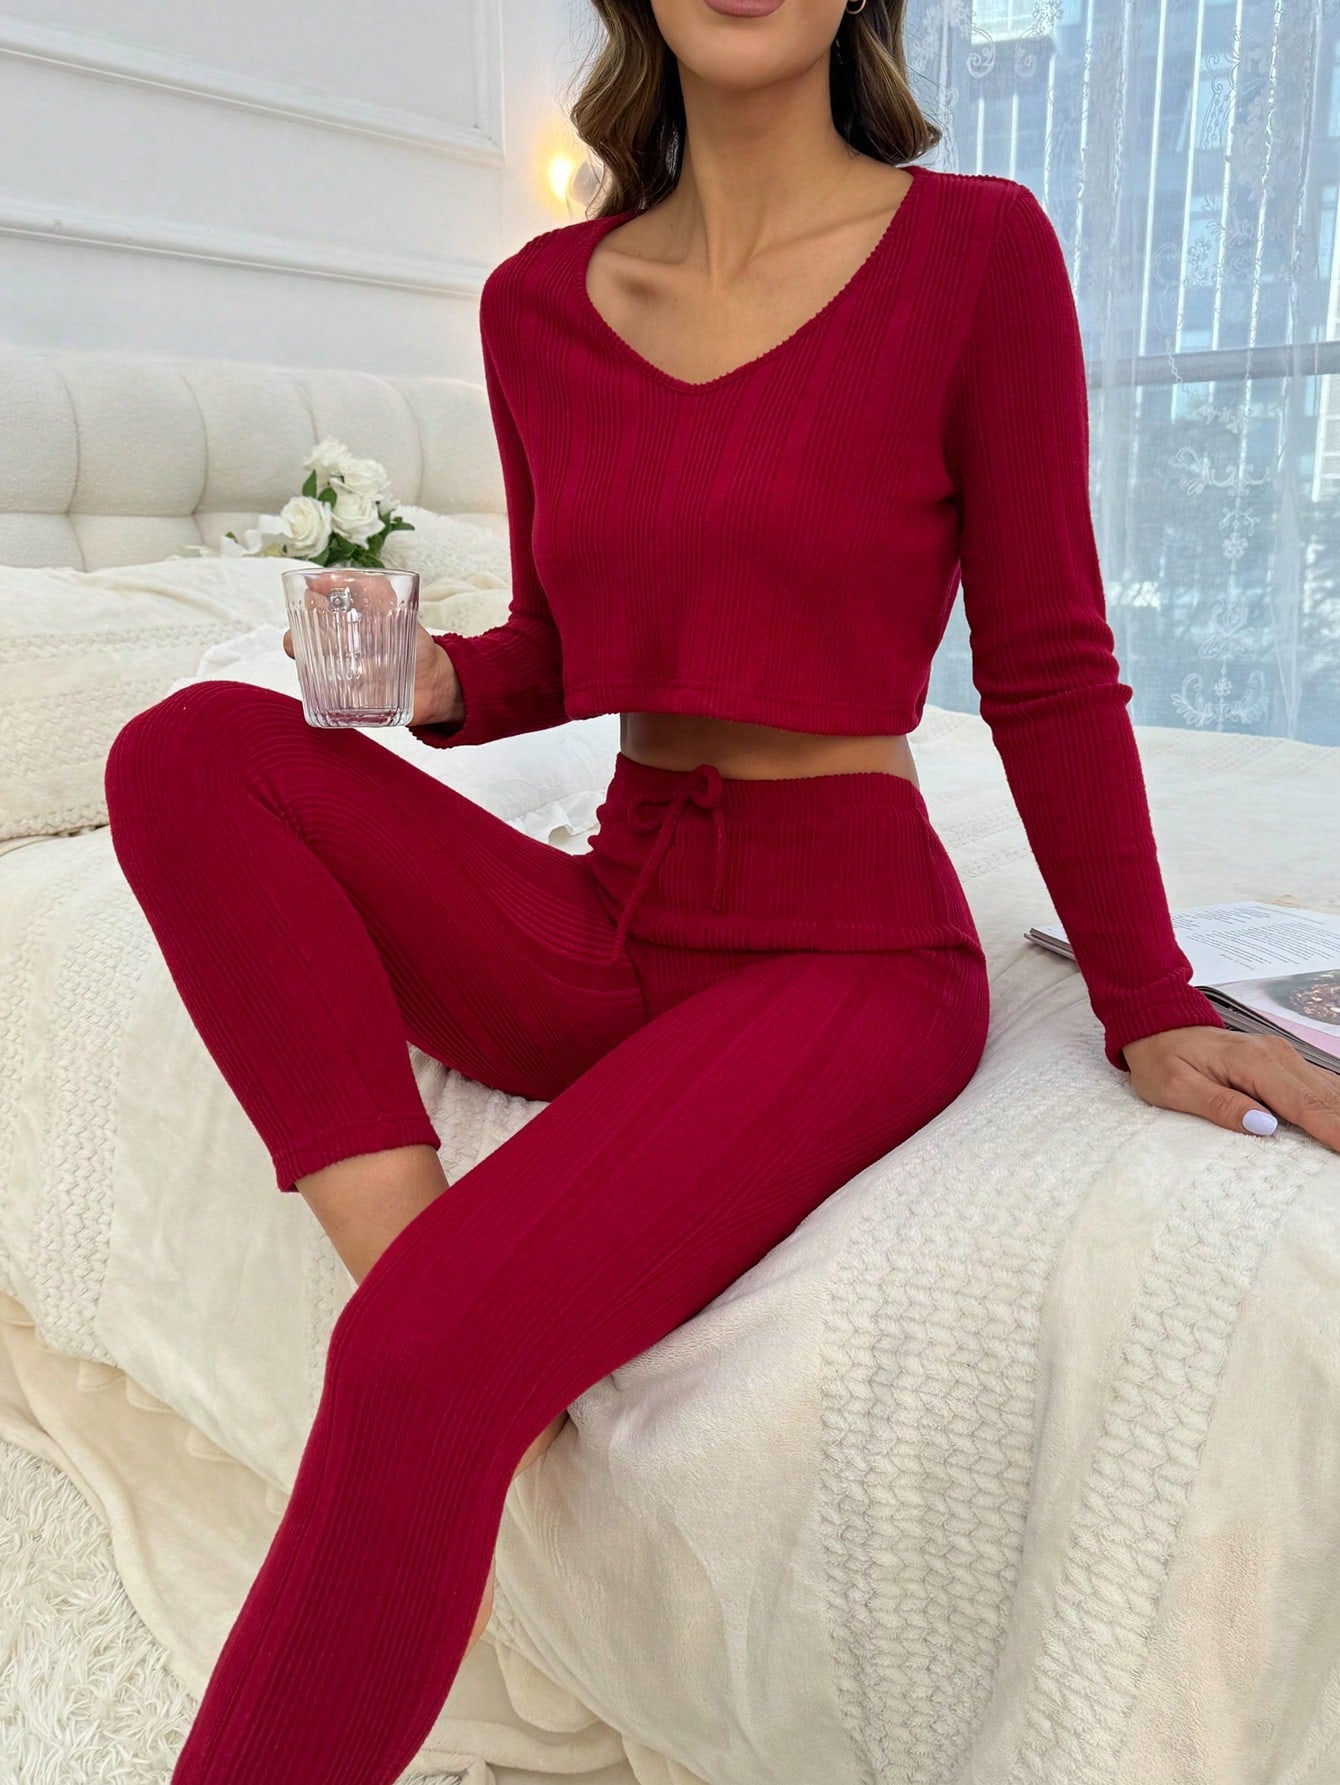 Cozy Chic: 2-Piece Fleece V neck and Cropped Pants for Casual Comfort